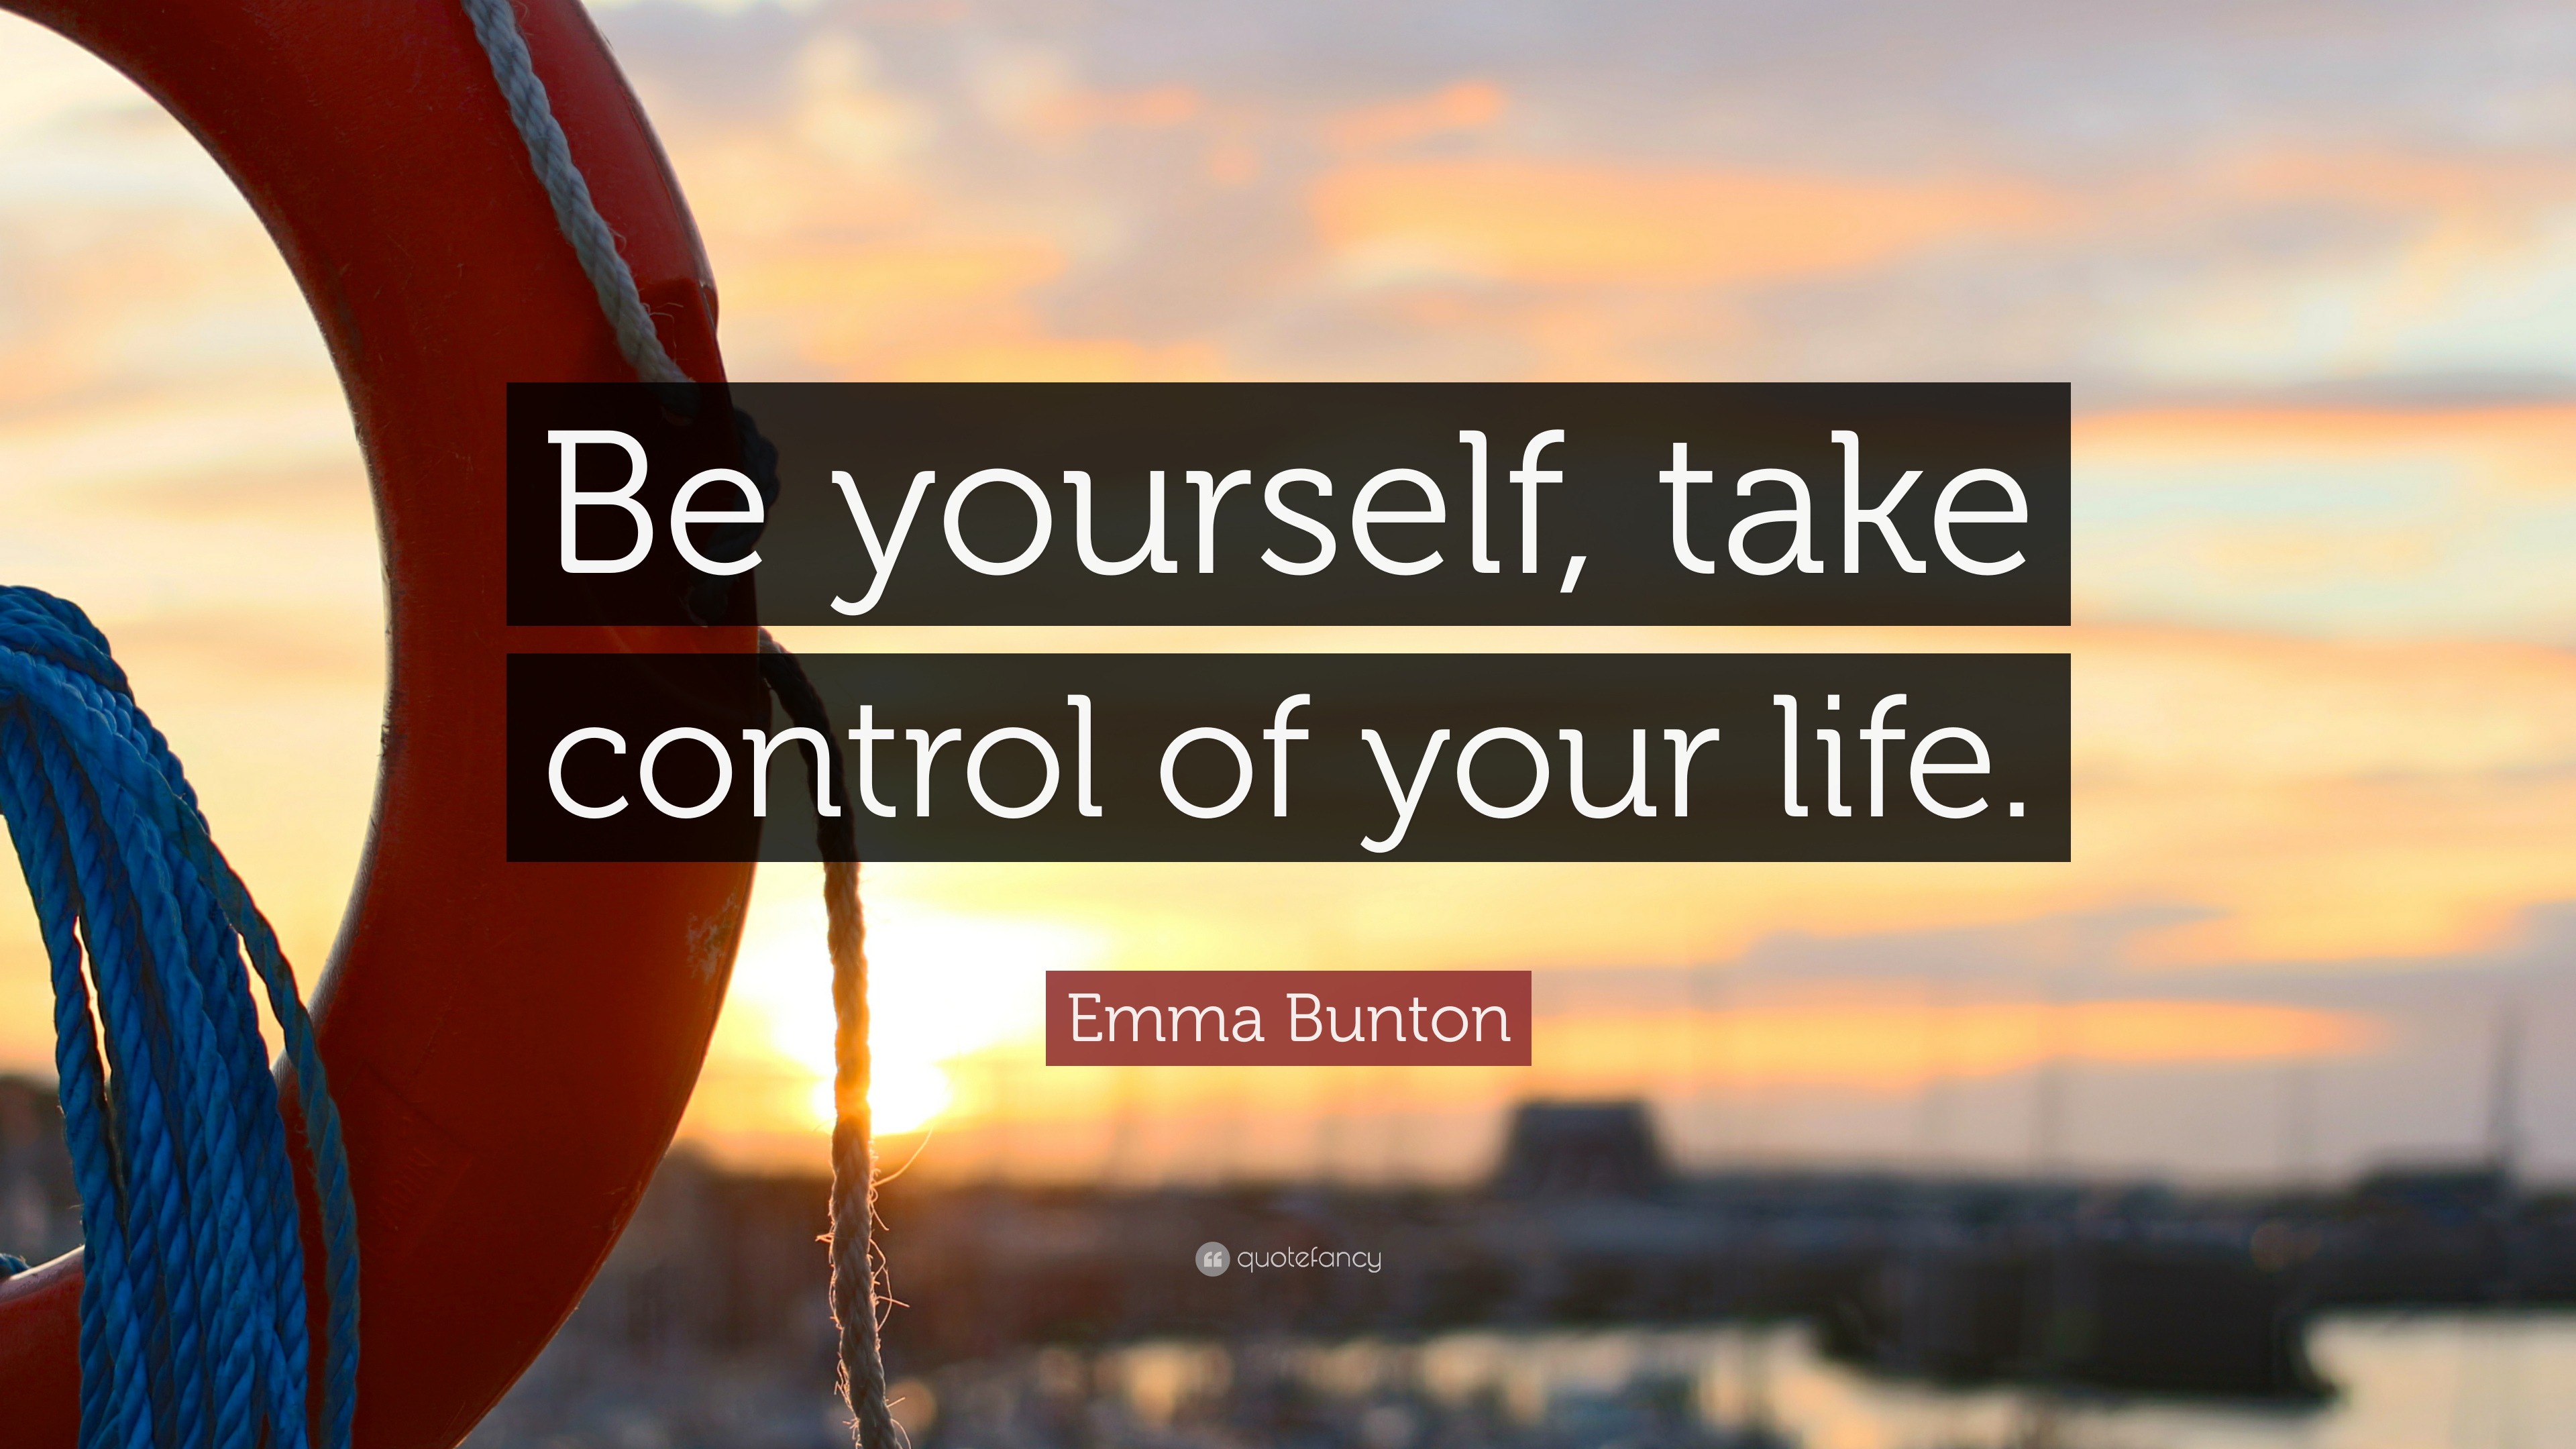 Emma Bunton Quote “be Yourself Take Control Of Your Life”